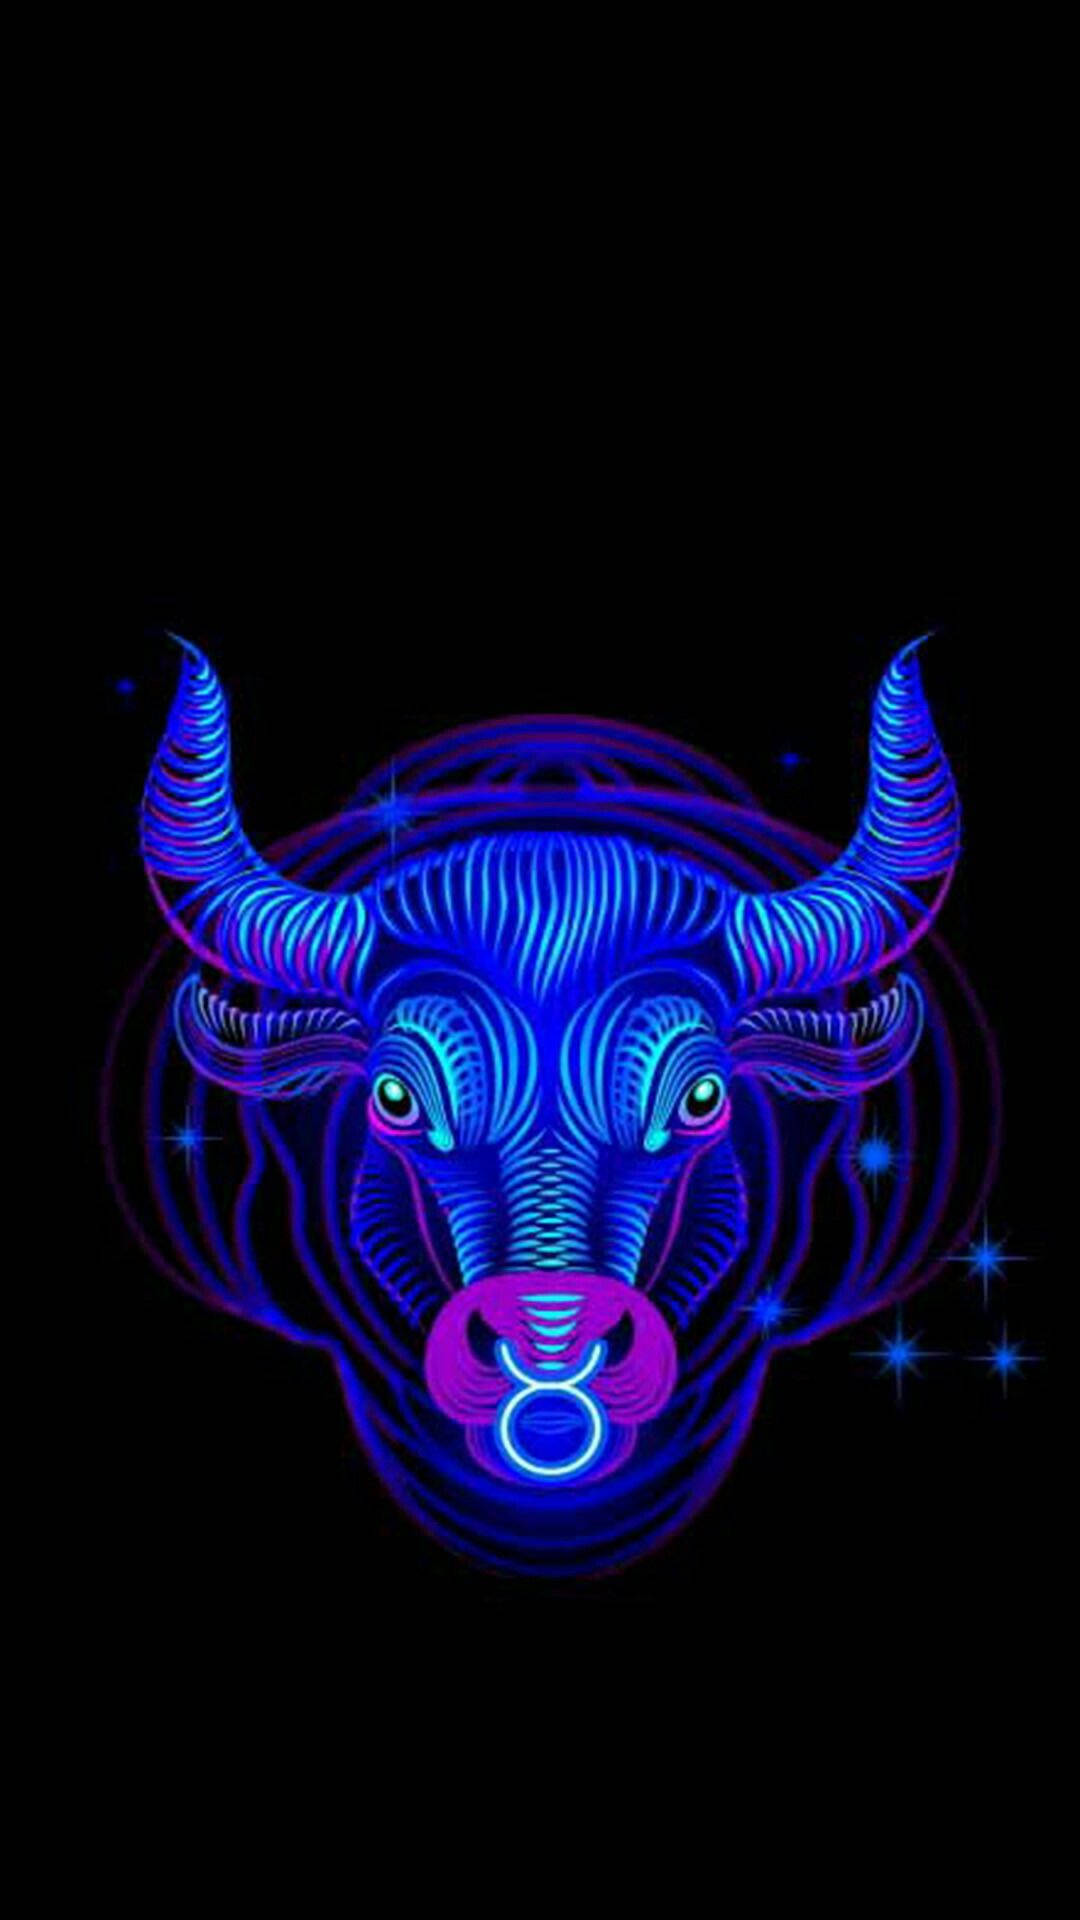 Taurus Aesthetics Brings You the Most Relaxing and Calming Colors in Wallpapers Wallpaper